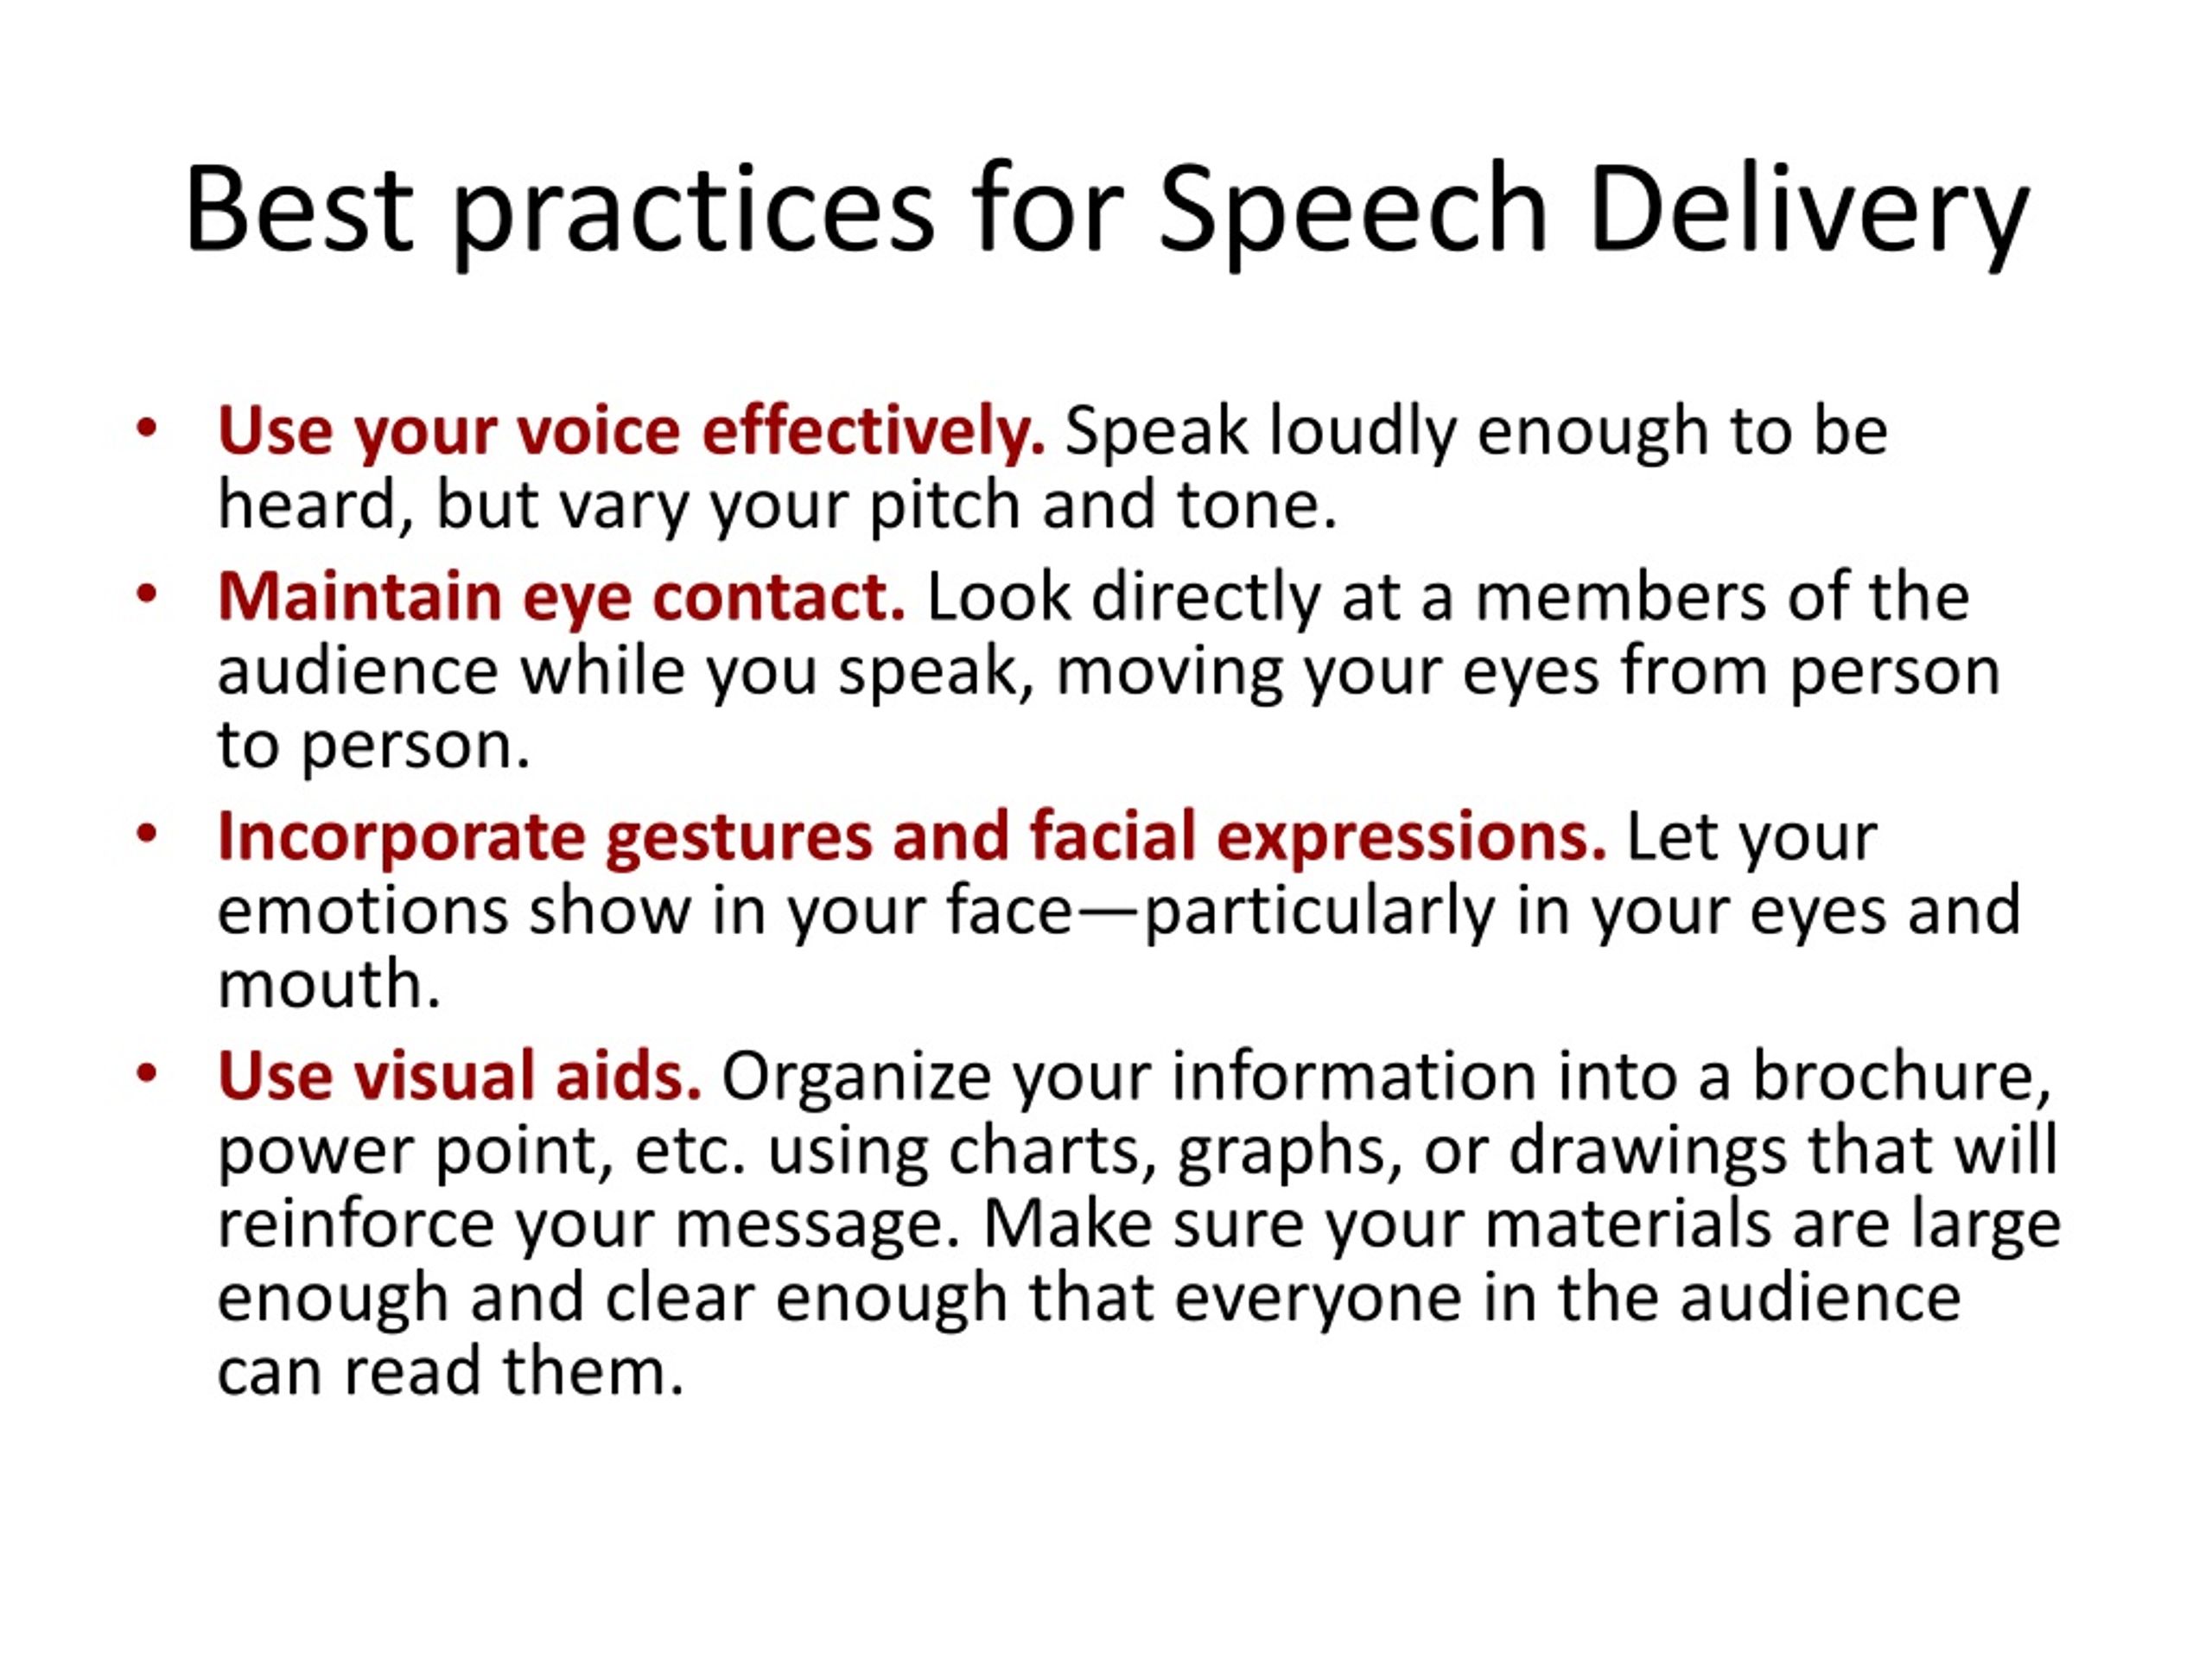 what is an effective speech delivery technique